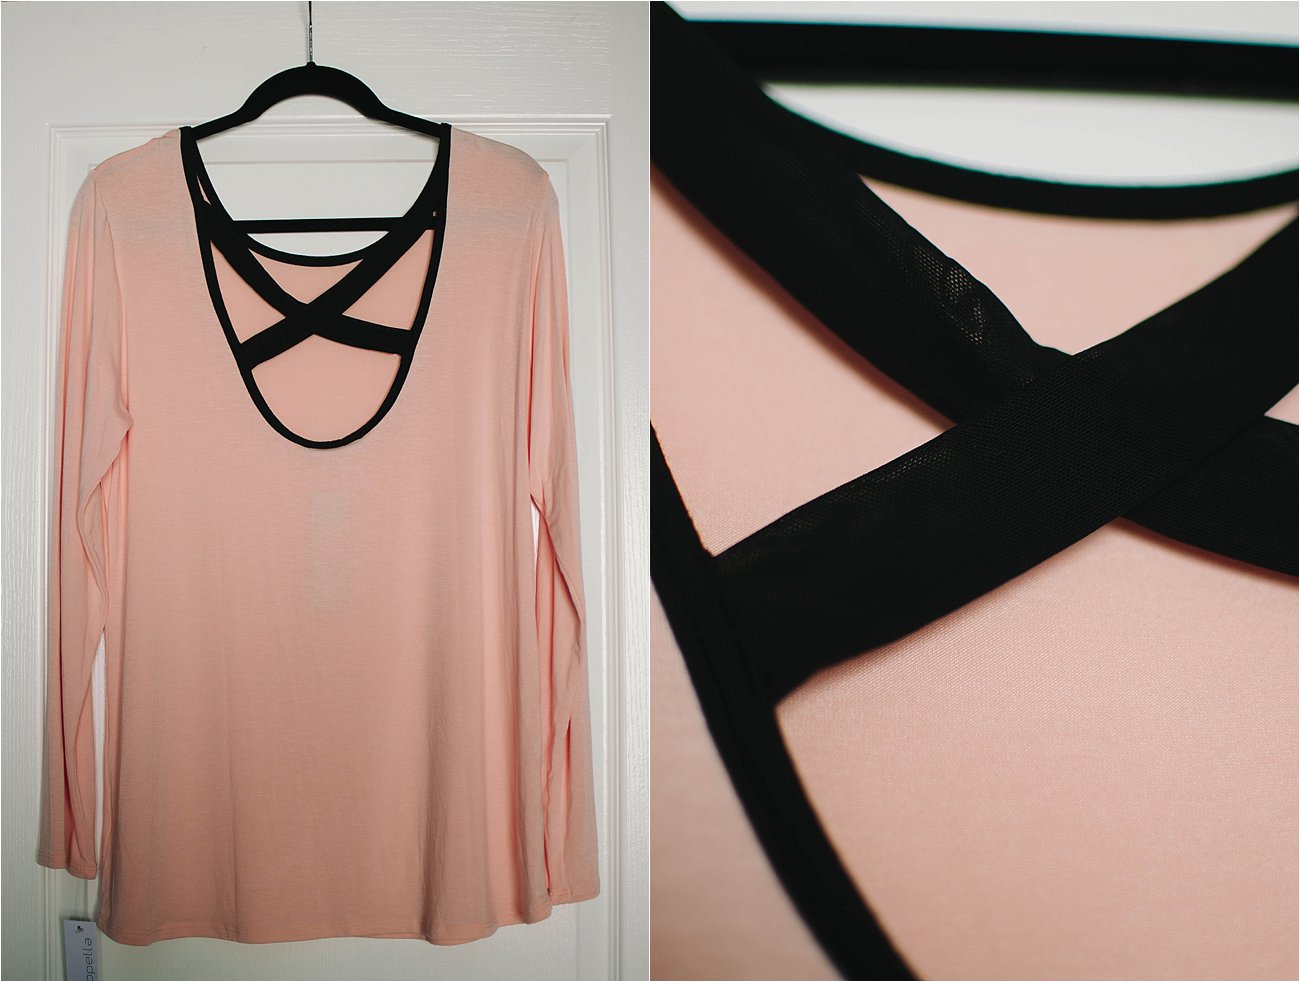 Loveappella "Lillac Cross Back Knit Top"